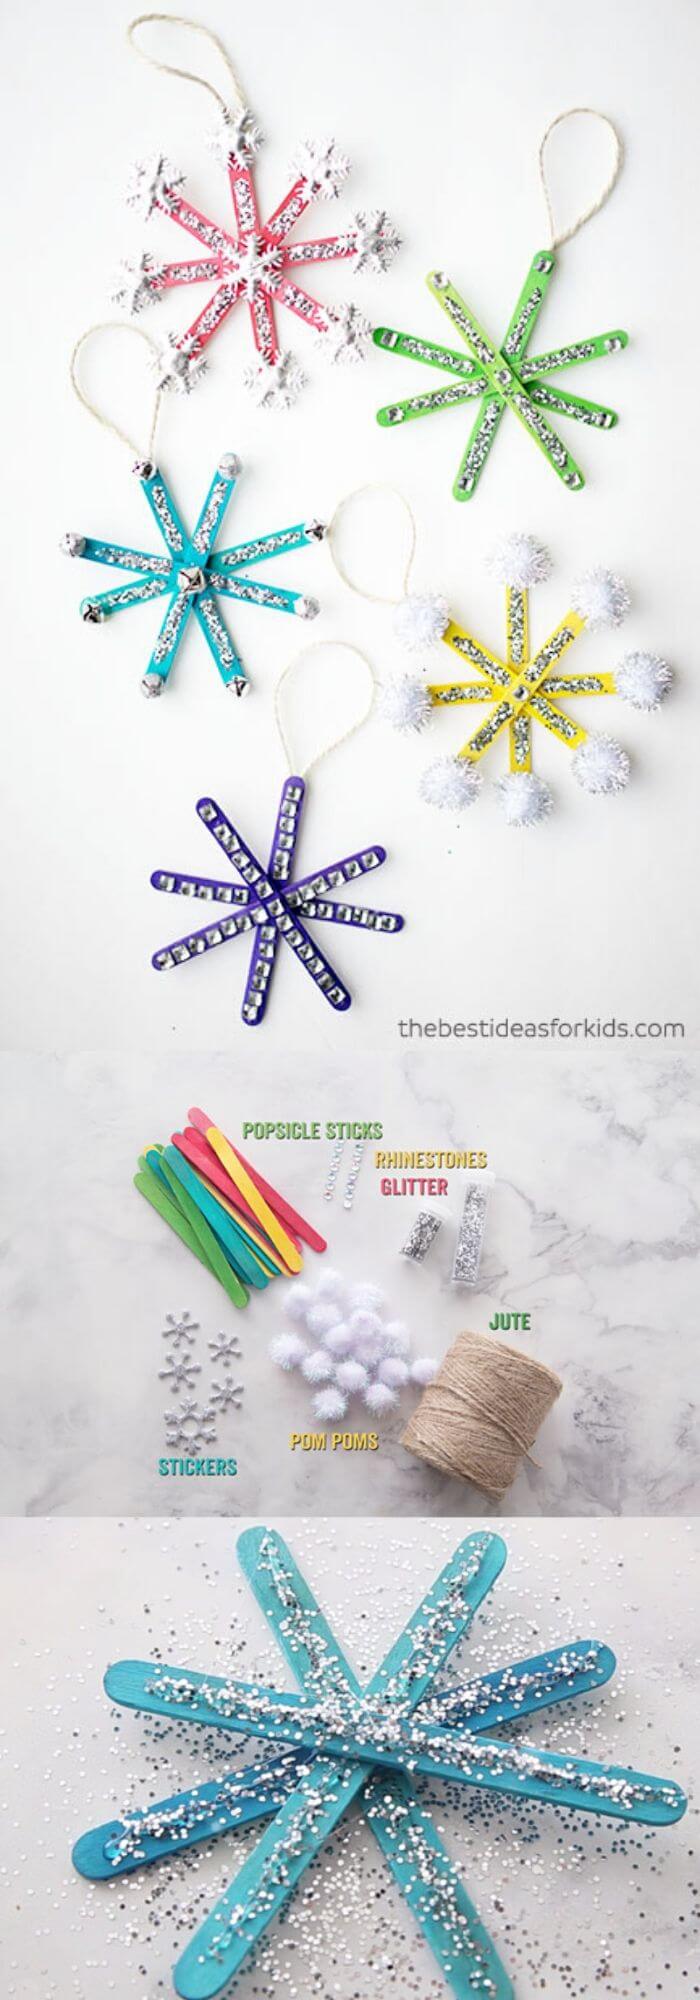 Popsicle Stick Snowflake Ornaments | Easy, Inexpensive, and Creative Christmas Crafts for Kids